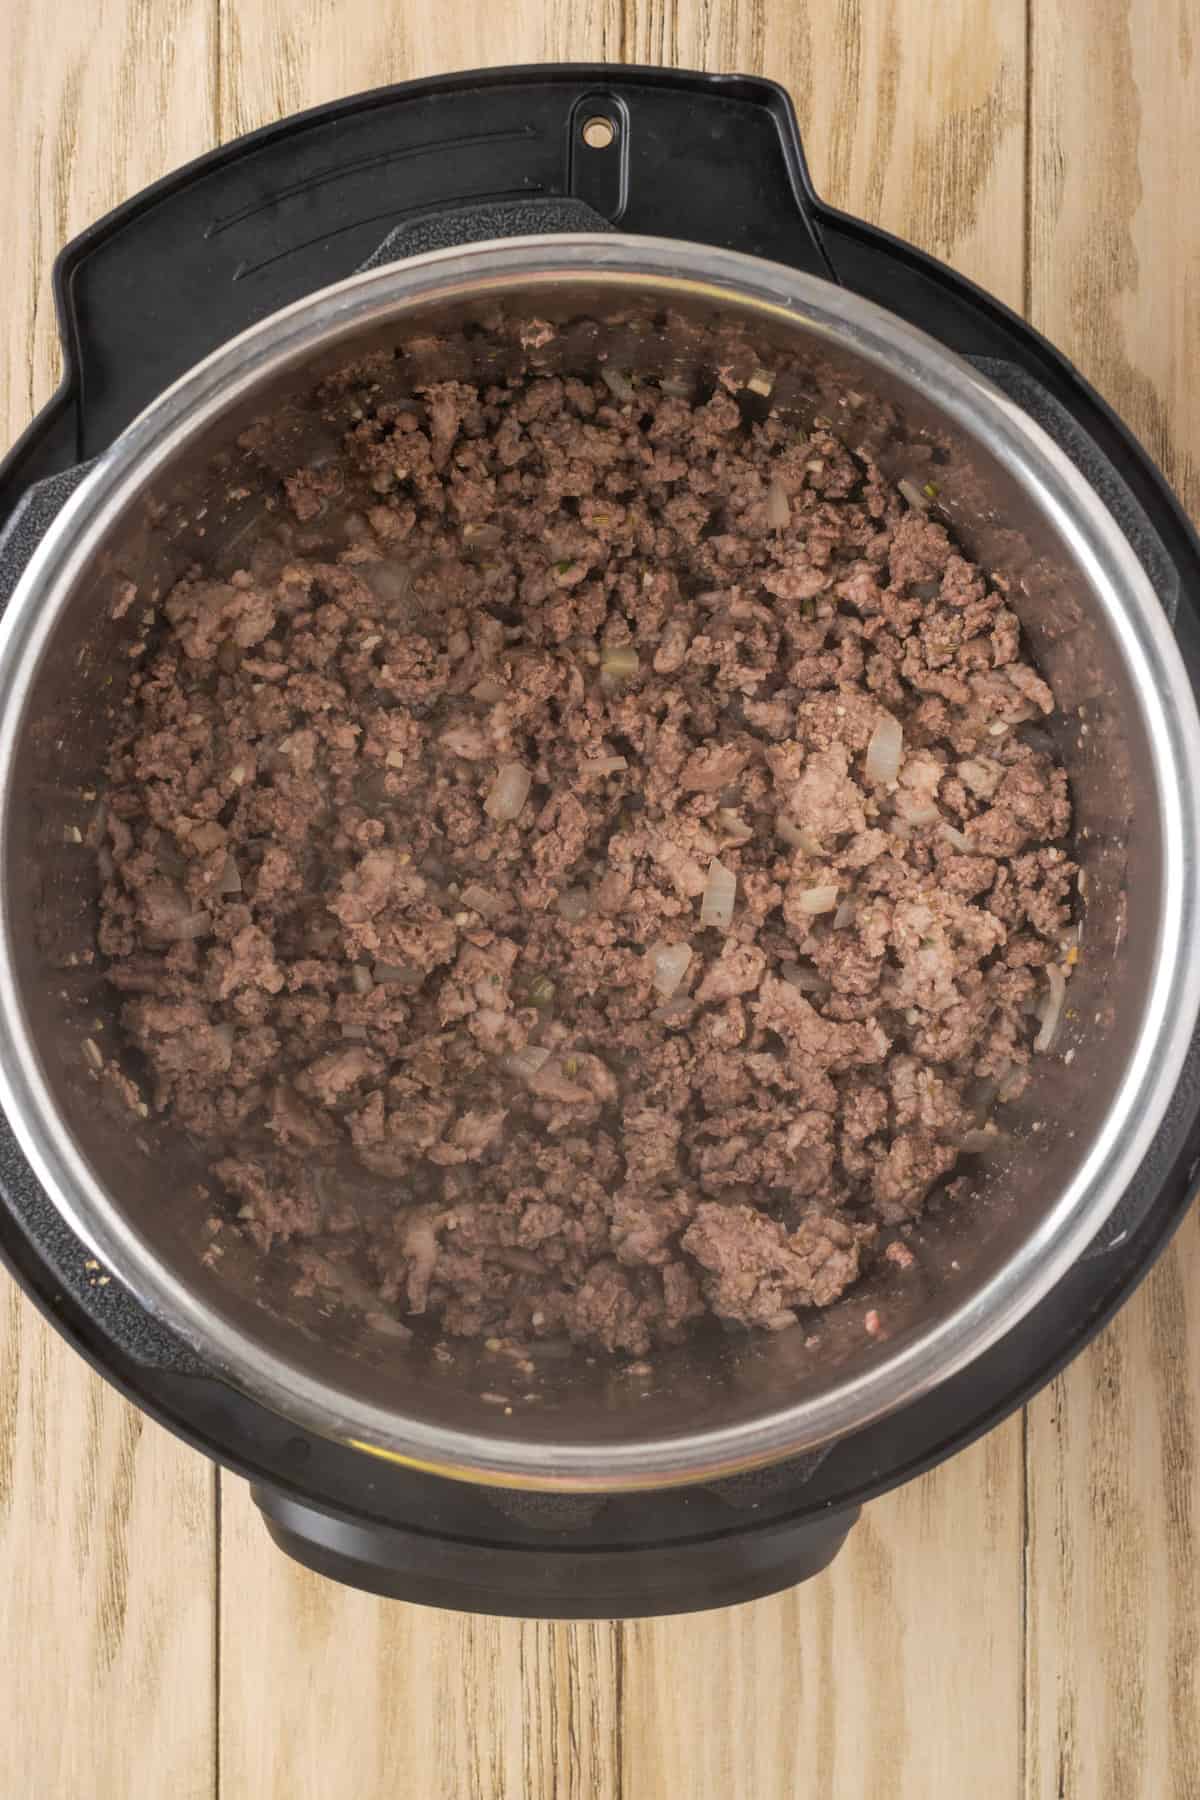 Browned meat inside the instant pot.